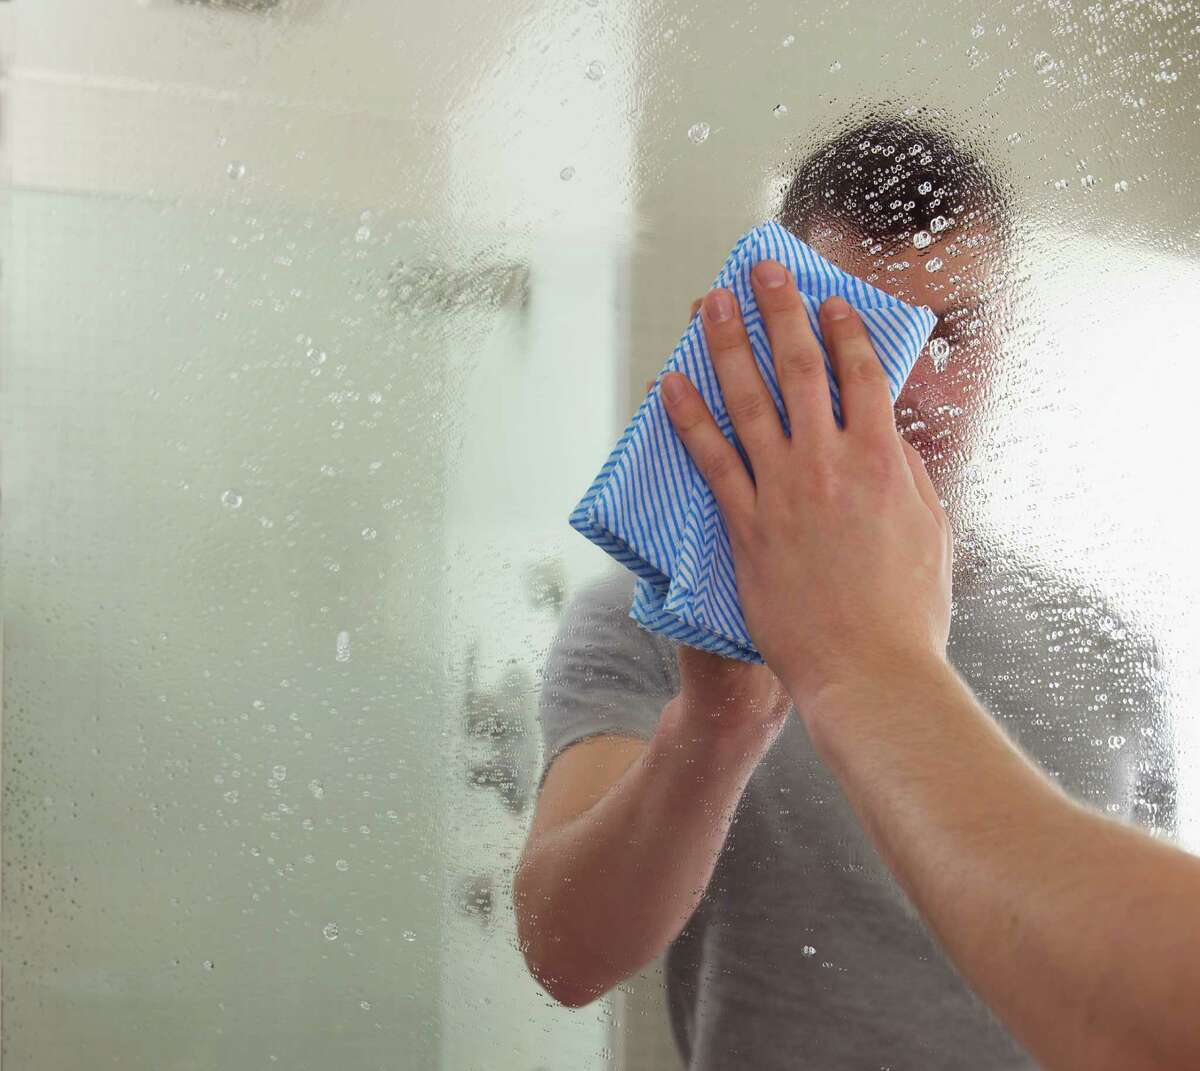 Clean only the dirty part of a mirror or window. Spraying cleaner on the cloth instead of the mirror will save time, too.